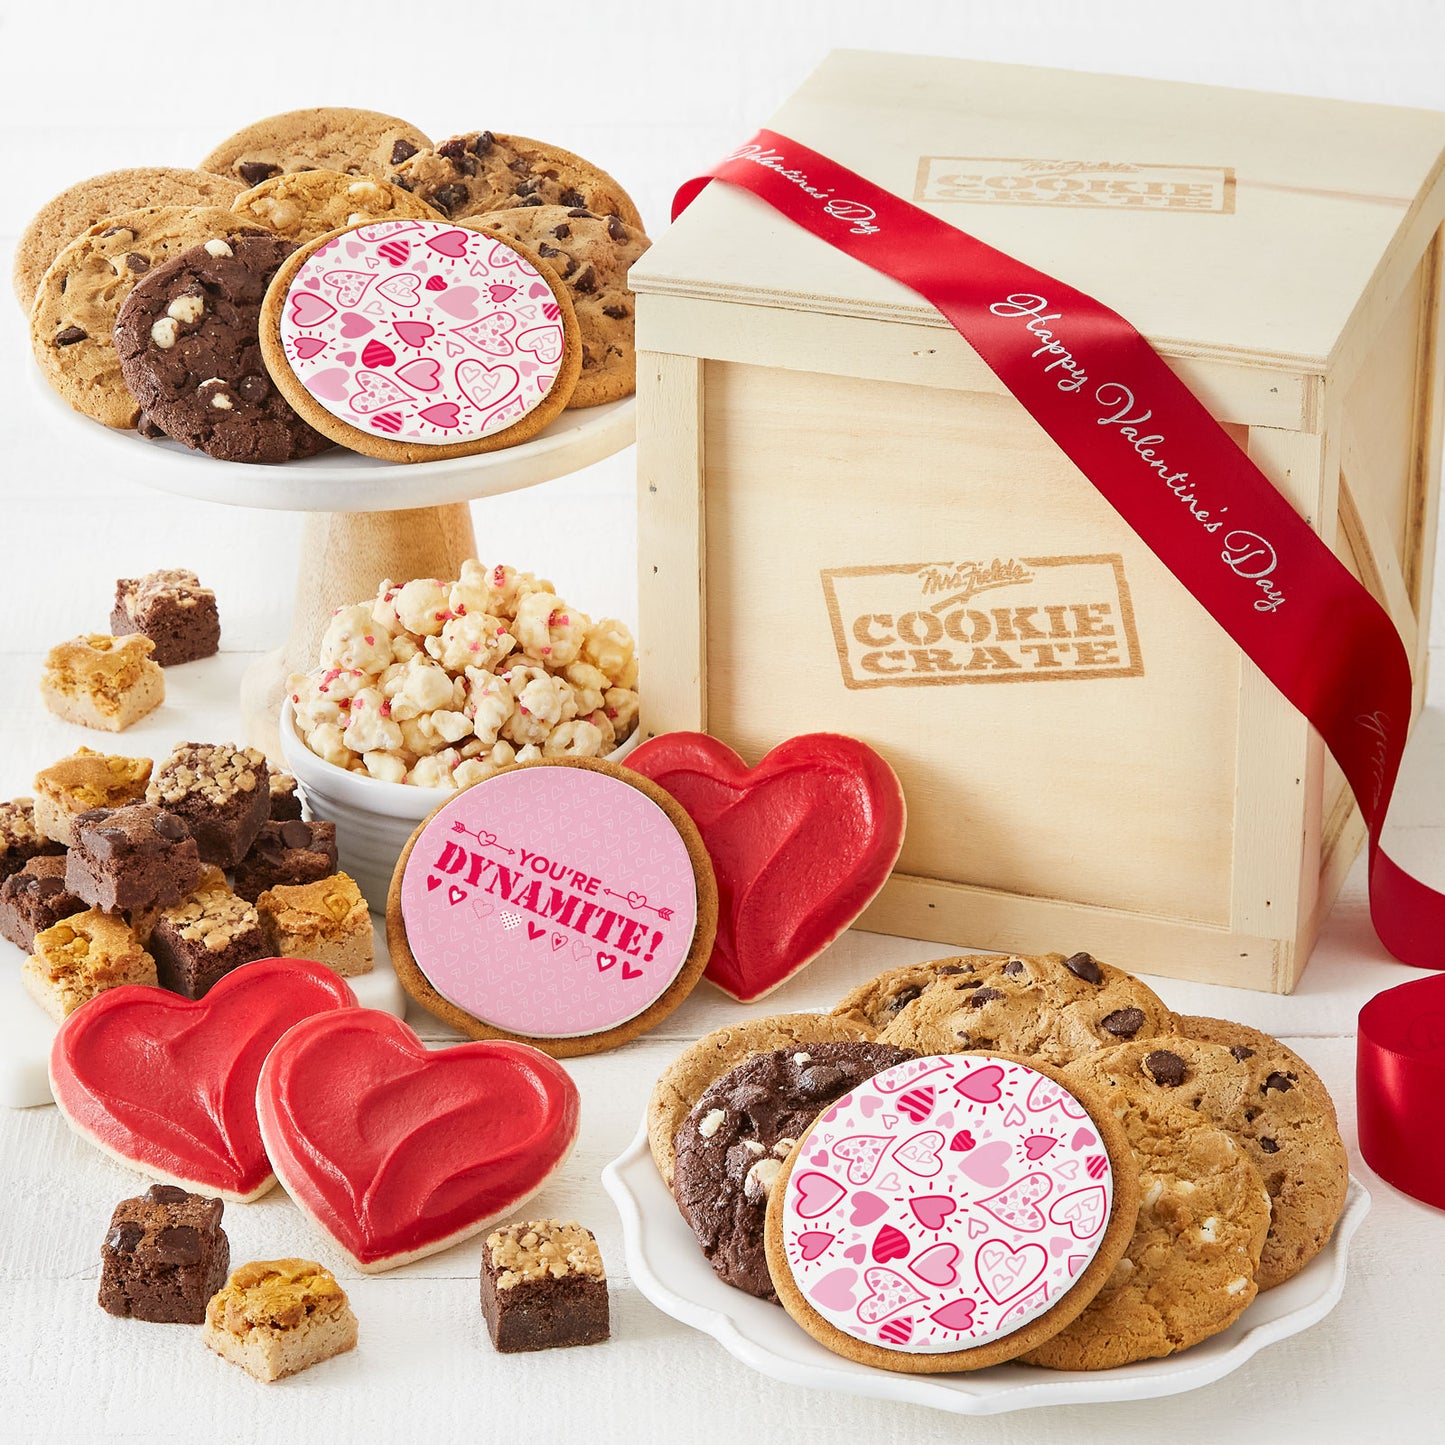 The Great Valentine's Cookie Crate